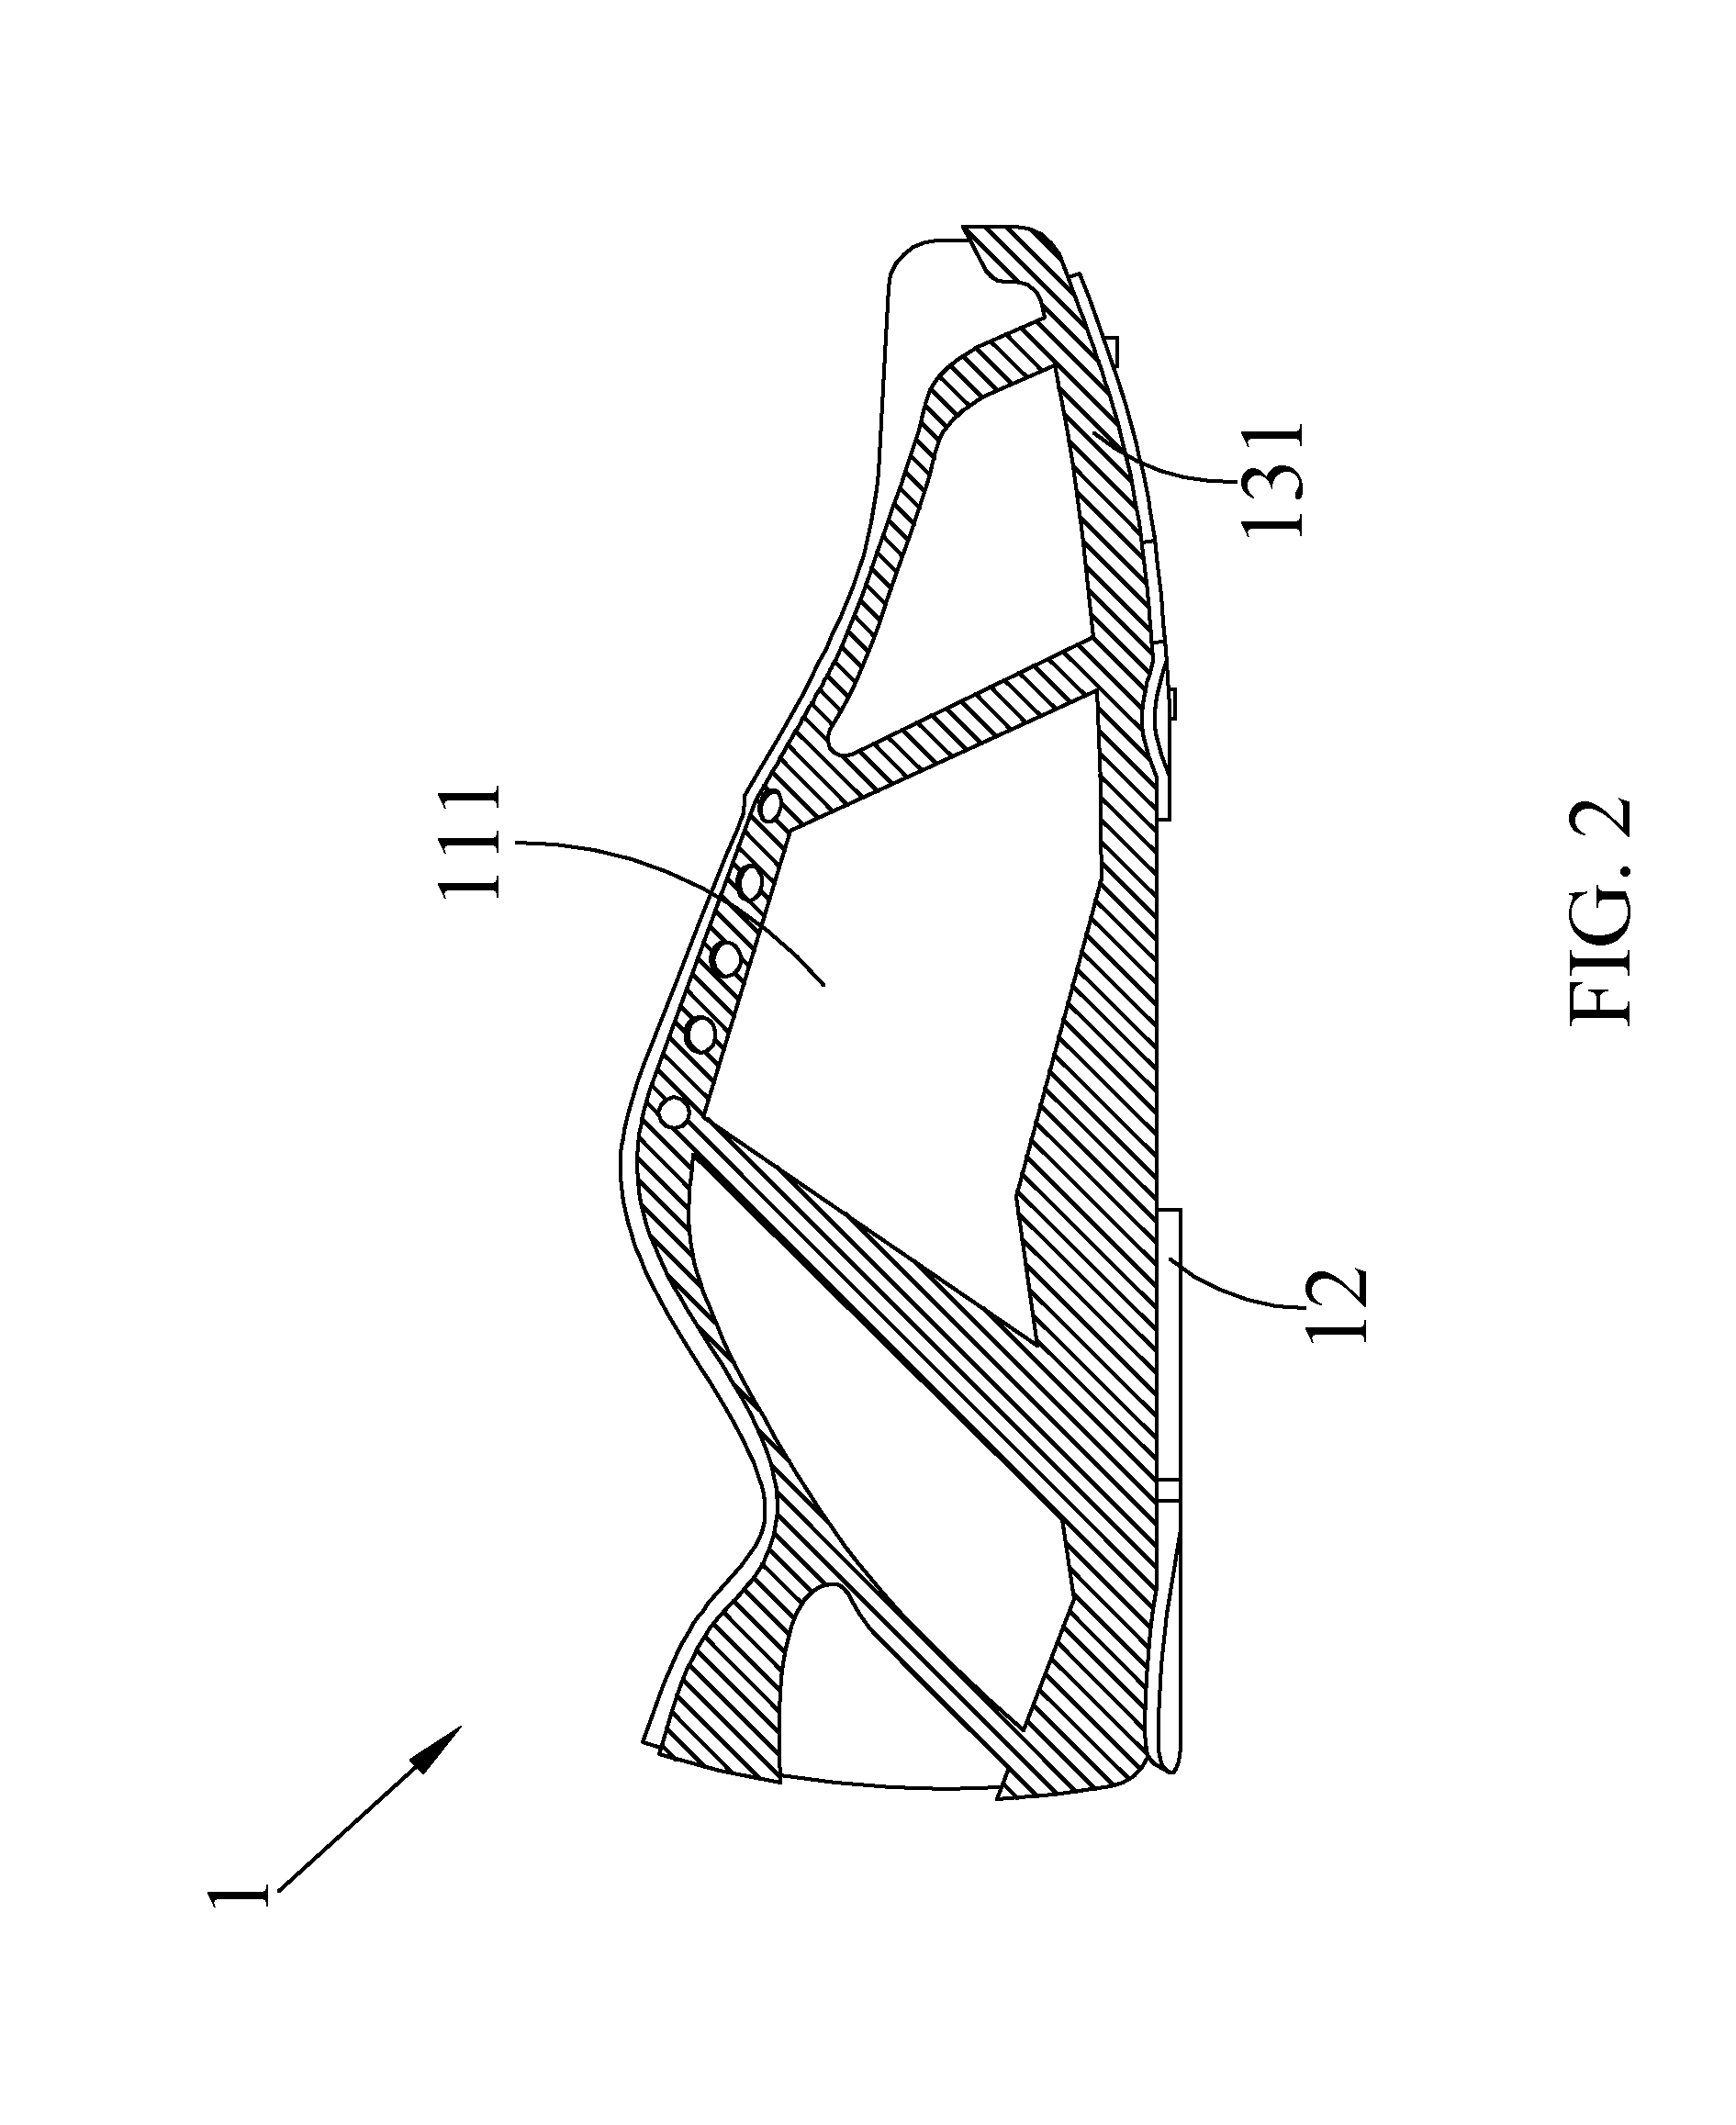 Shoes of automated process production and shoemaking method thereof